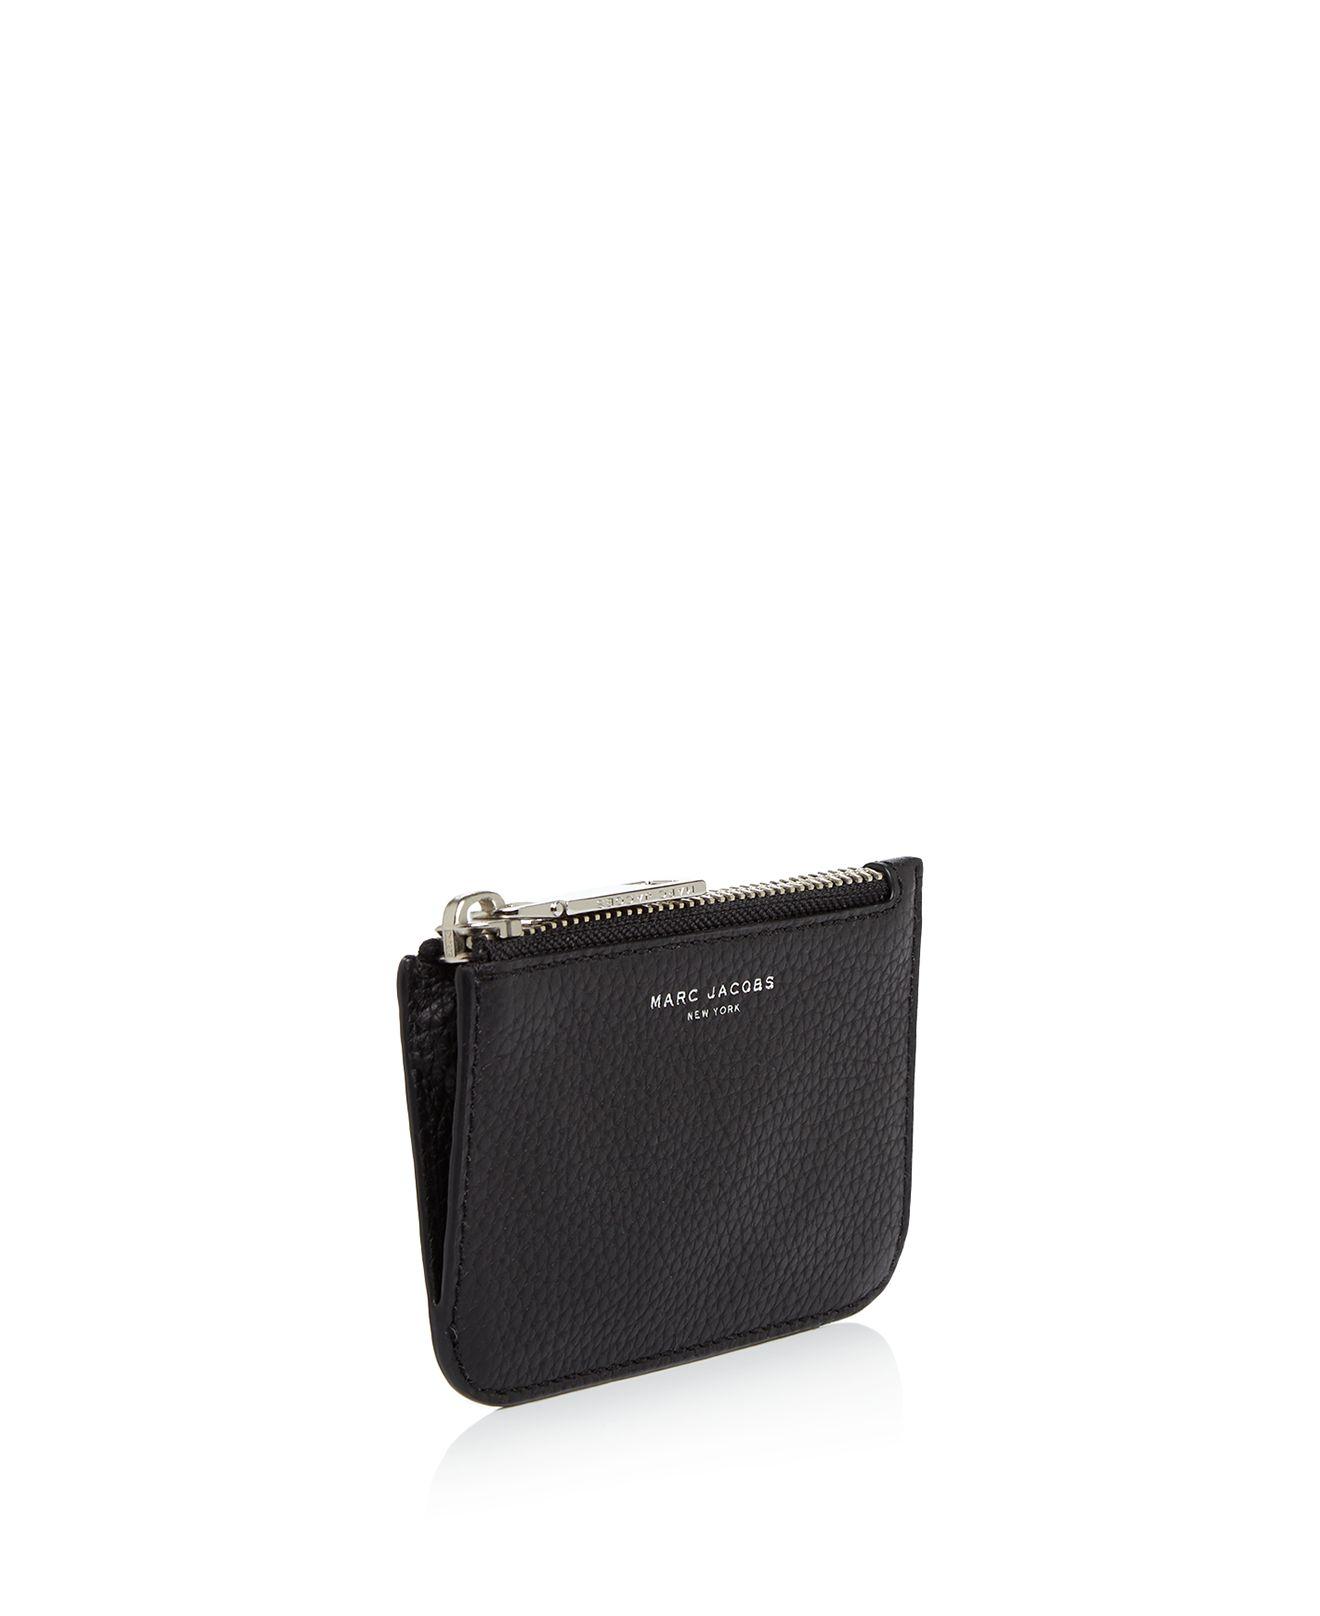 Marc Jacobs Leather Gotham City Key Pouch in Black/Silver (Black) - Lyst